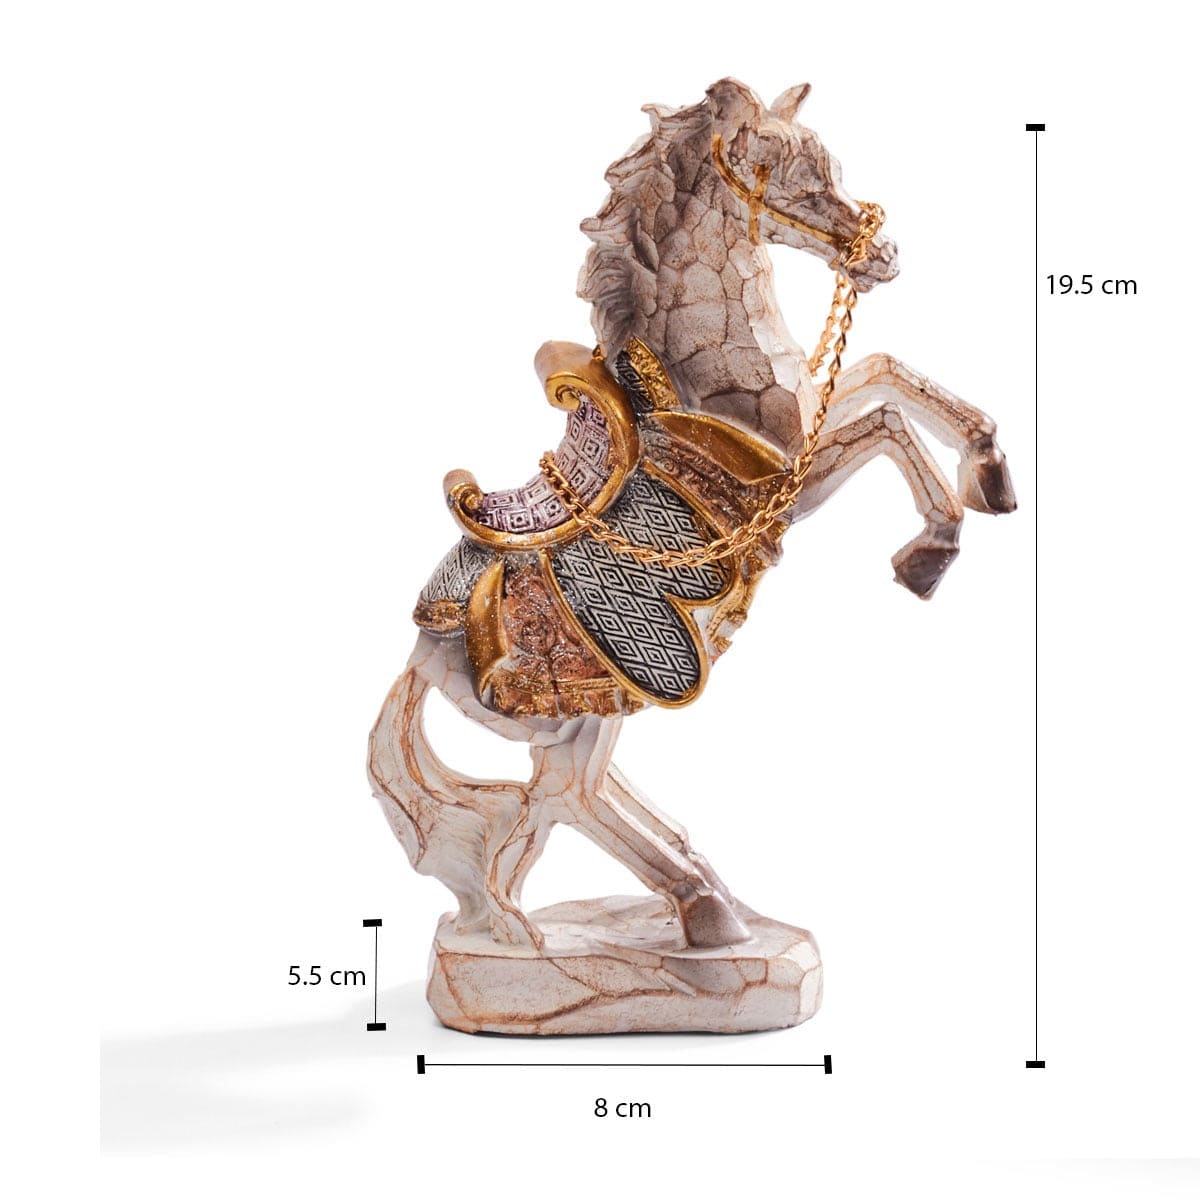 Red Butler Showpieces Galloping Horse AAGH00R08Y19A1 AGH08A1 Galloping Horse Statue – Symbol of Strength and Success for Home Decor | Animal figurine showpieces Redbutler